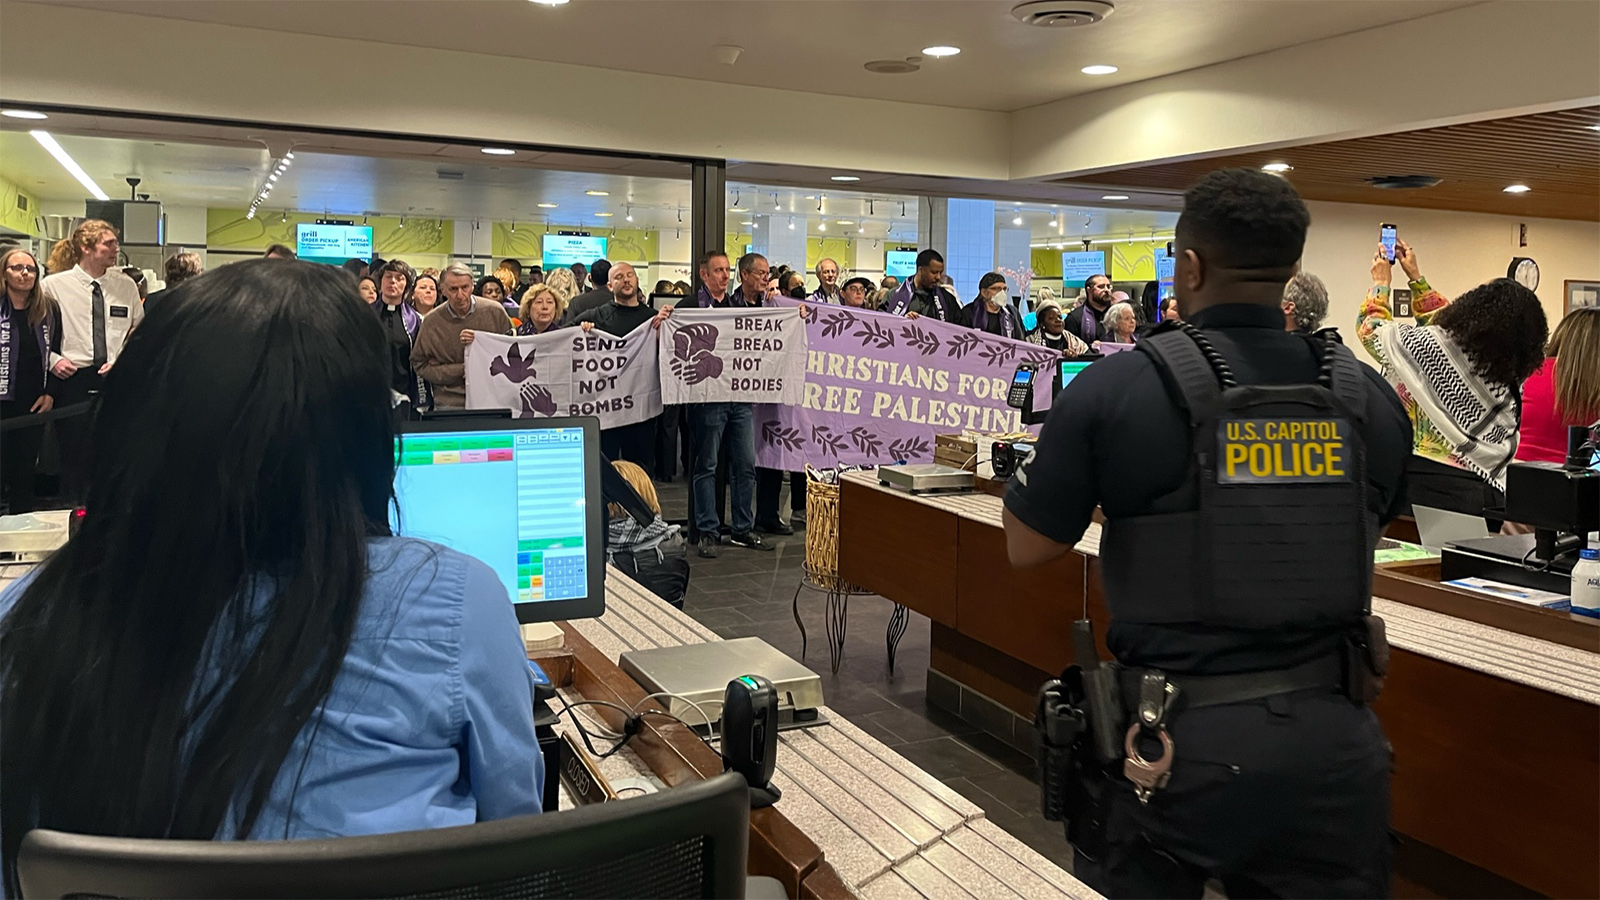 U.S. Capitol Police arrive to arrest demonstrators during a Christians for a Free Palestine protest in the U.S. Senate cafeteria, Tuesday, April 9, 2024, at the Capitol in Washington. (RNS photo/Aleja Hertzler-McCain)